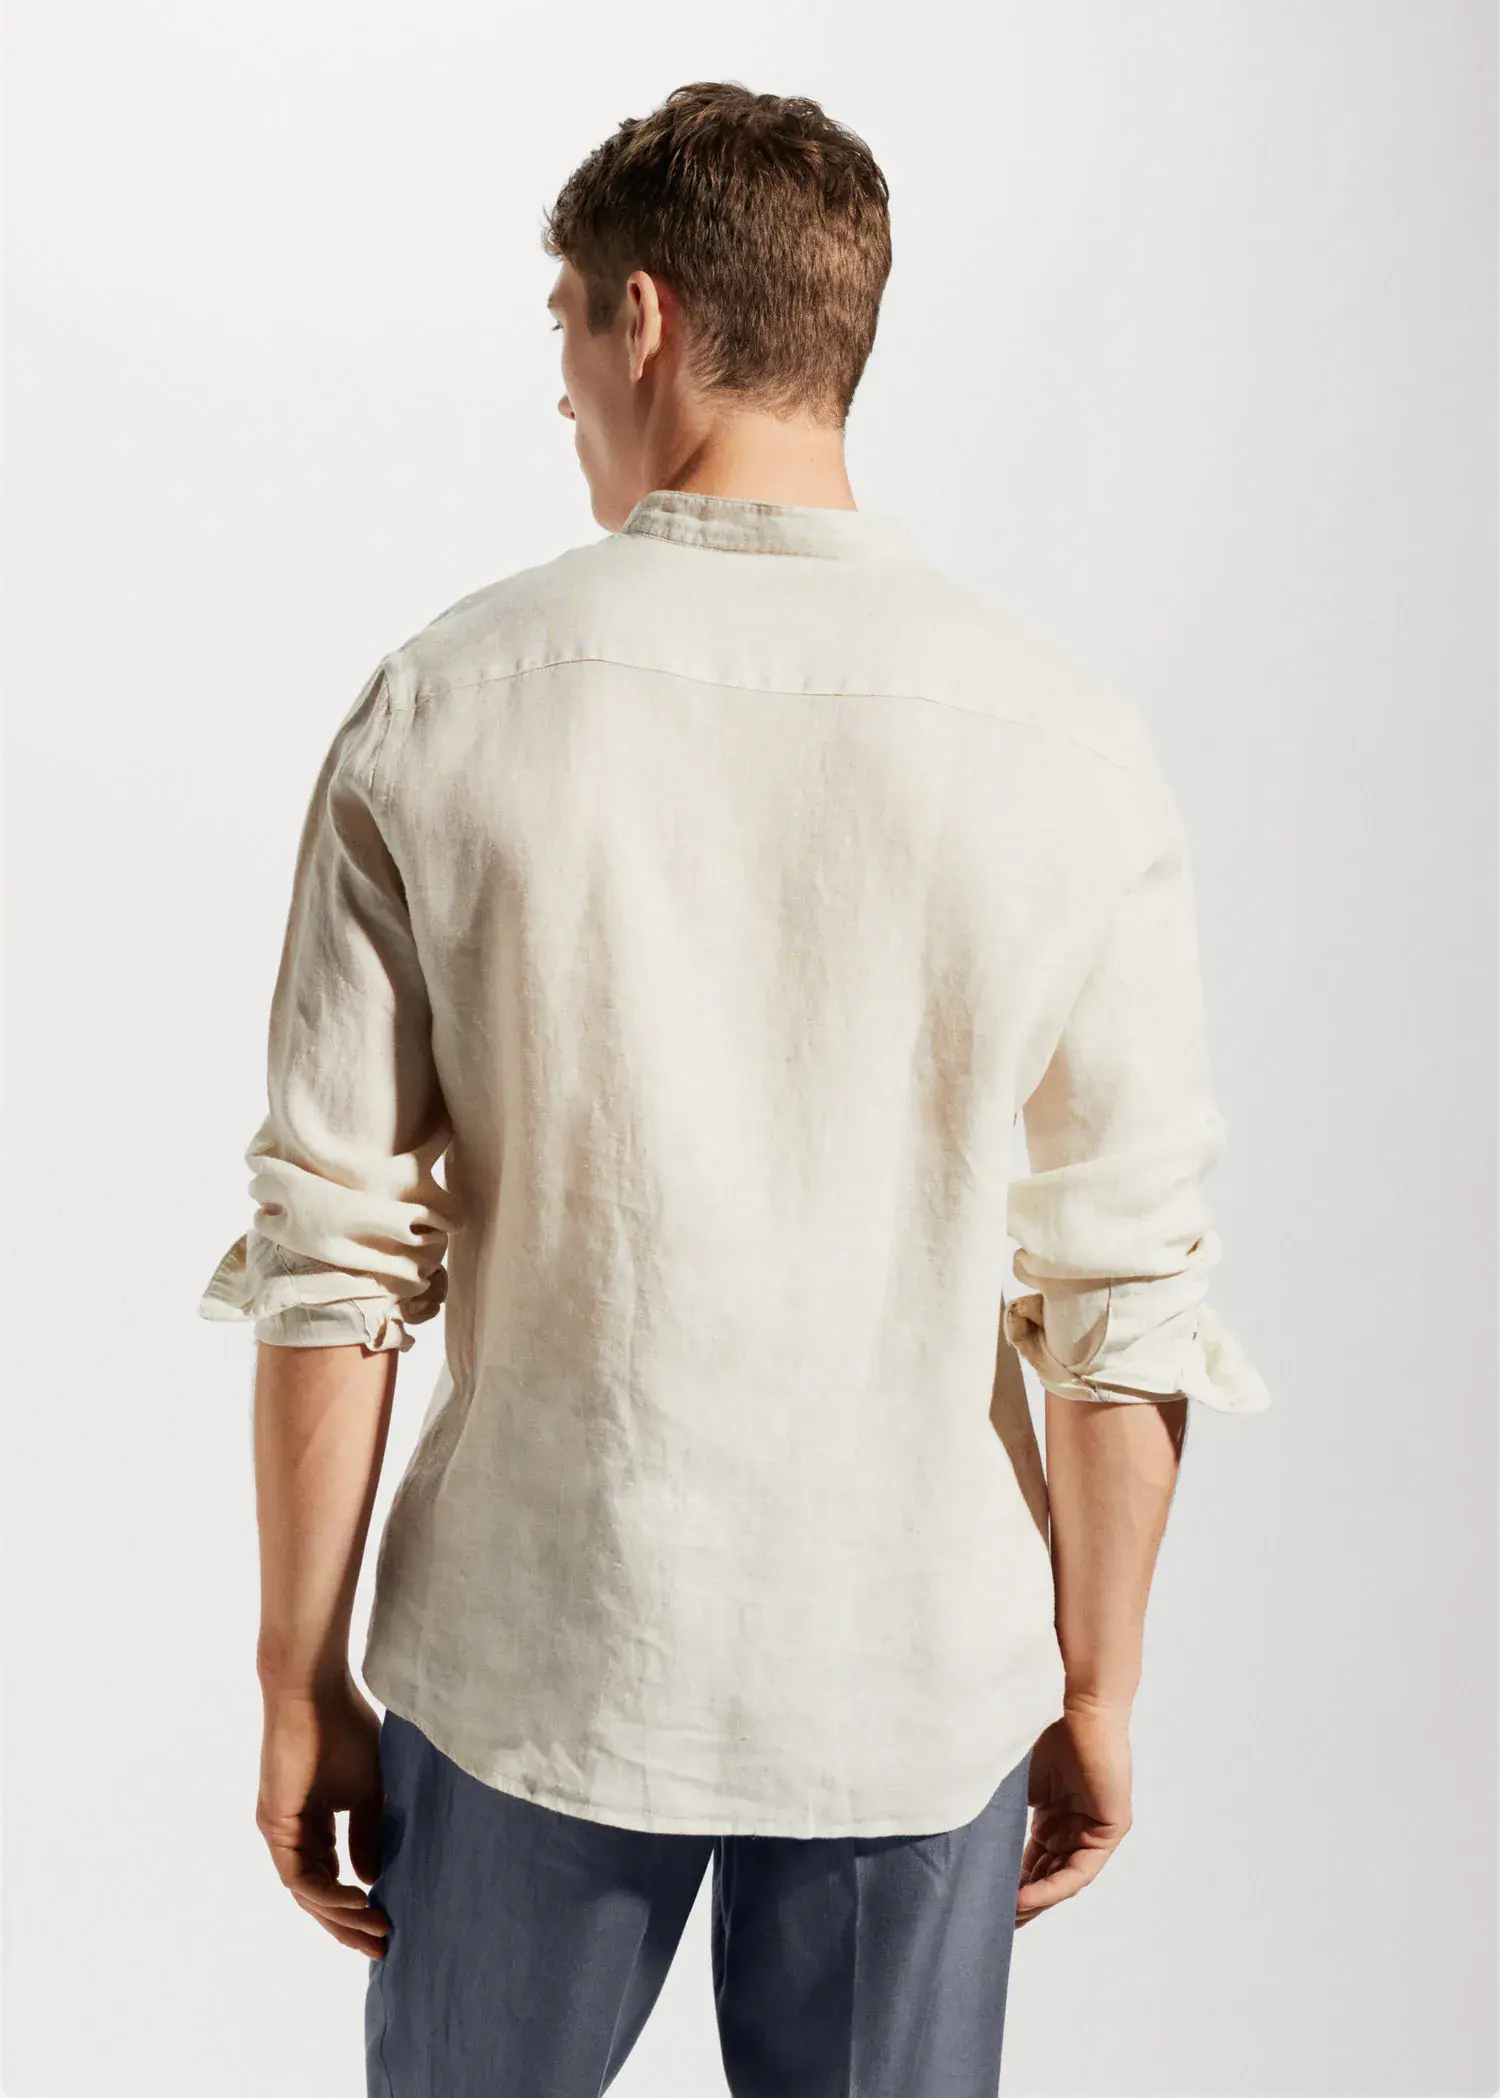 Mango 100% linen Mao collar shirt. a man in a white shirt is standing in front of a white wall. 